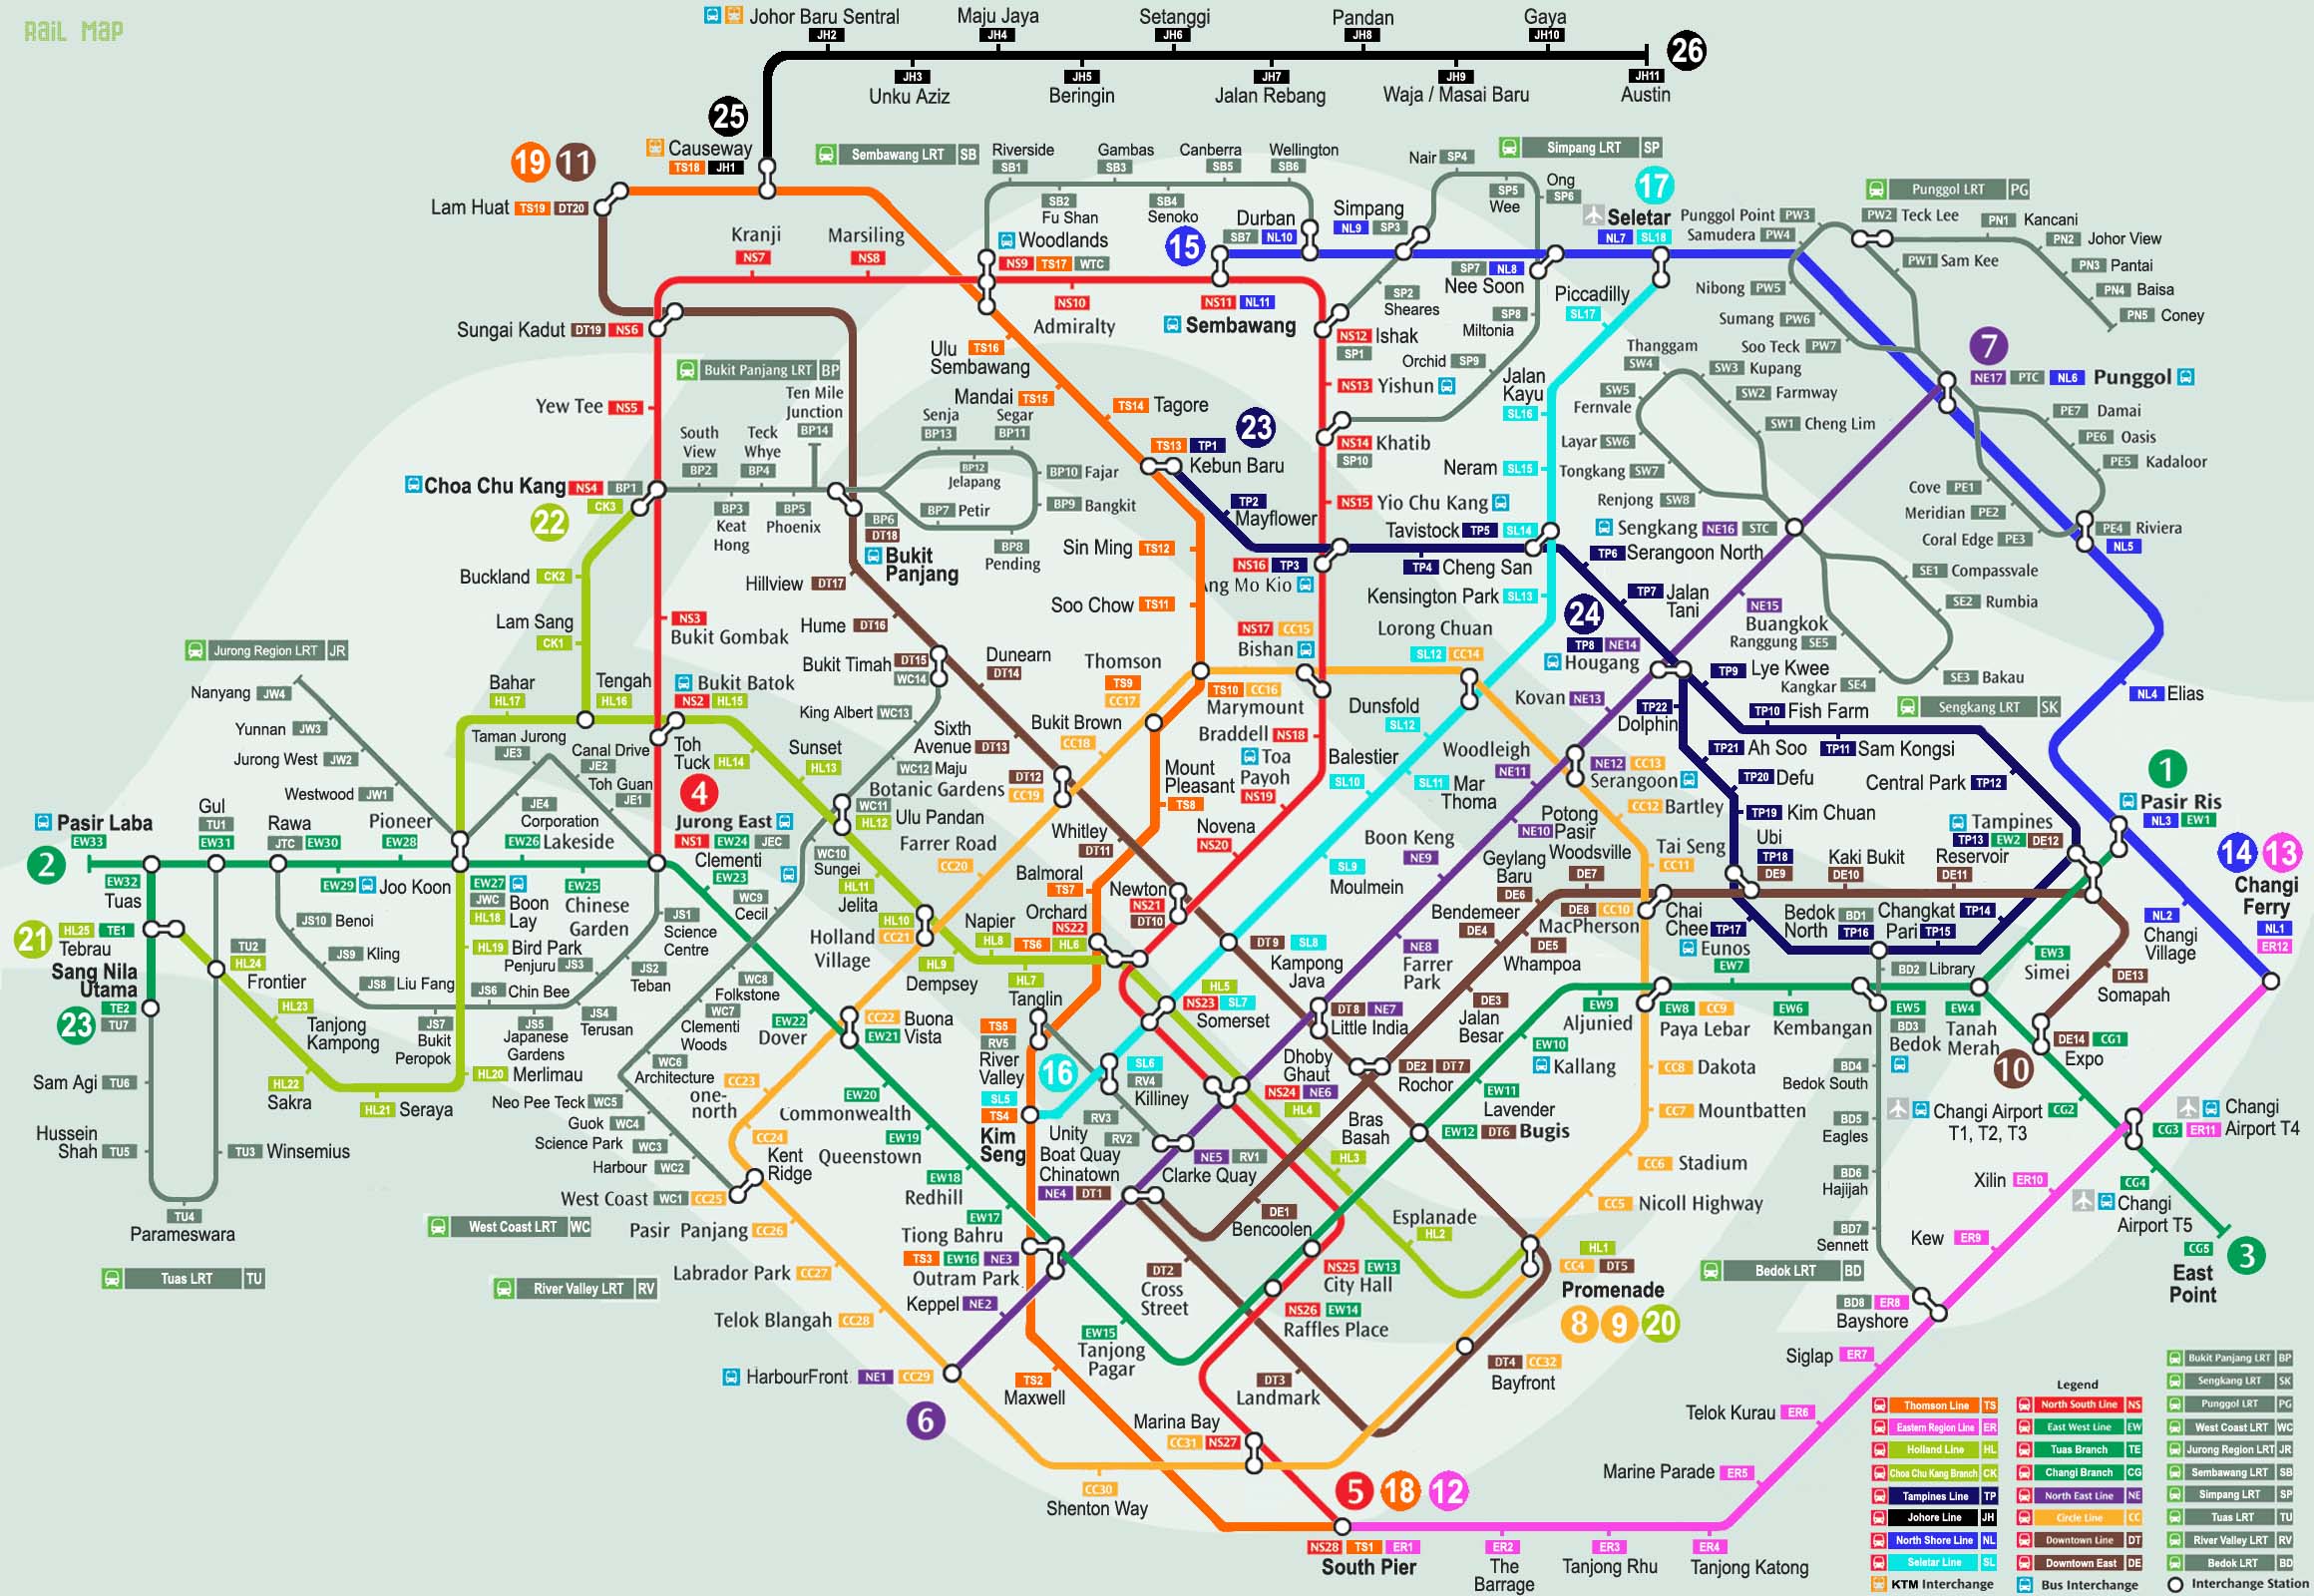 How Well Do You Know the MRT system? | S.U.R.E.